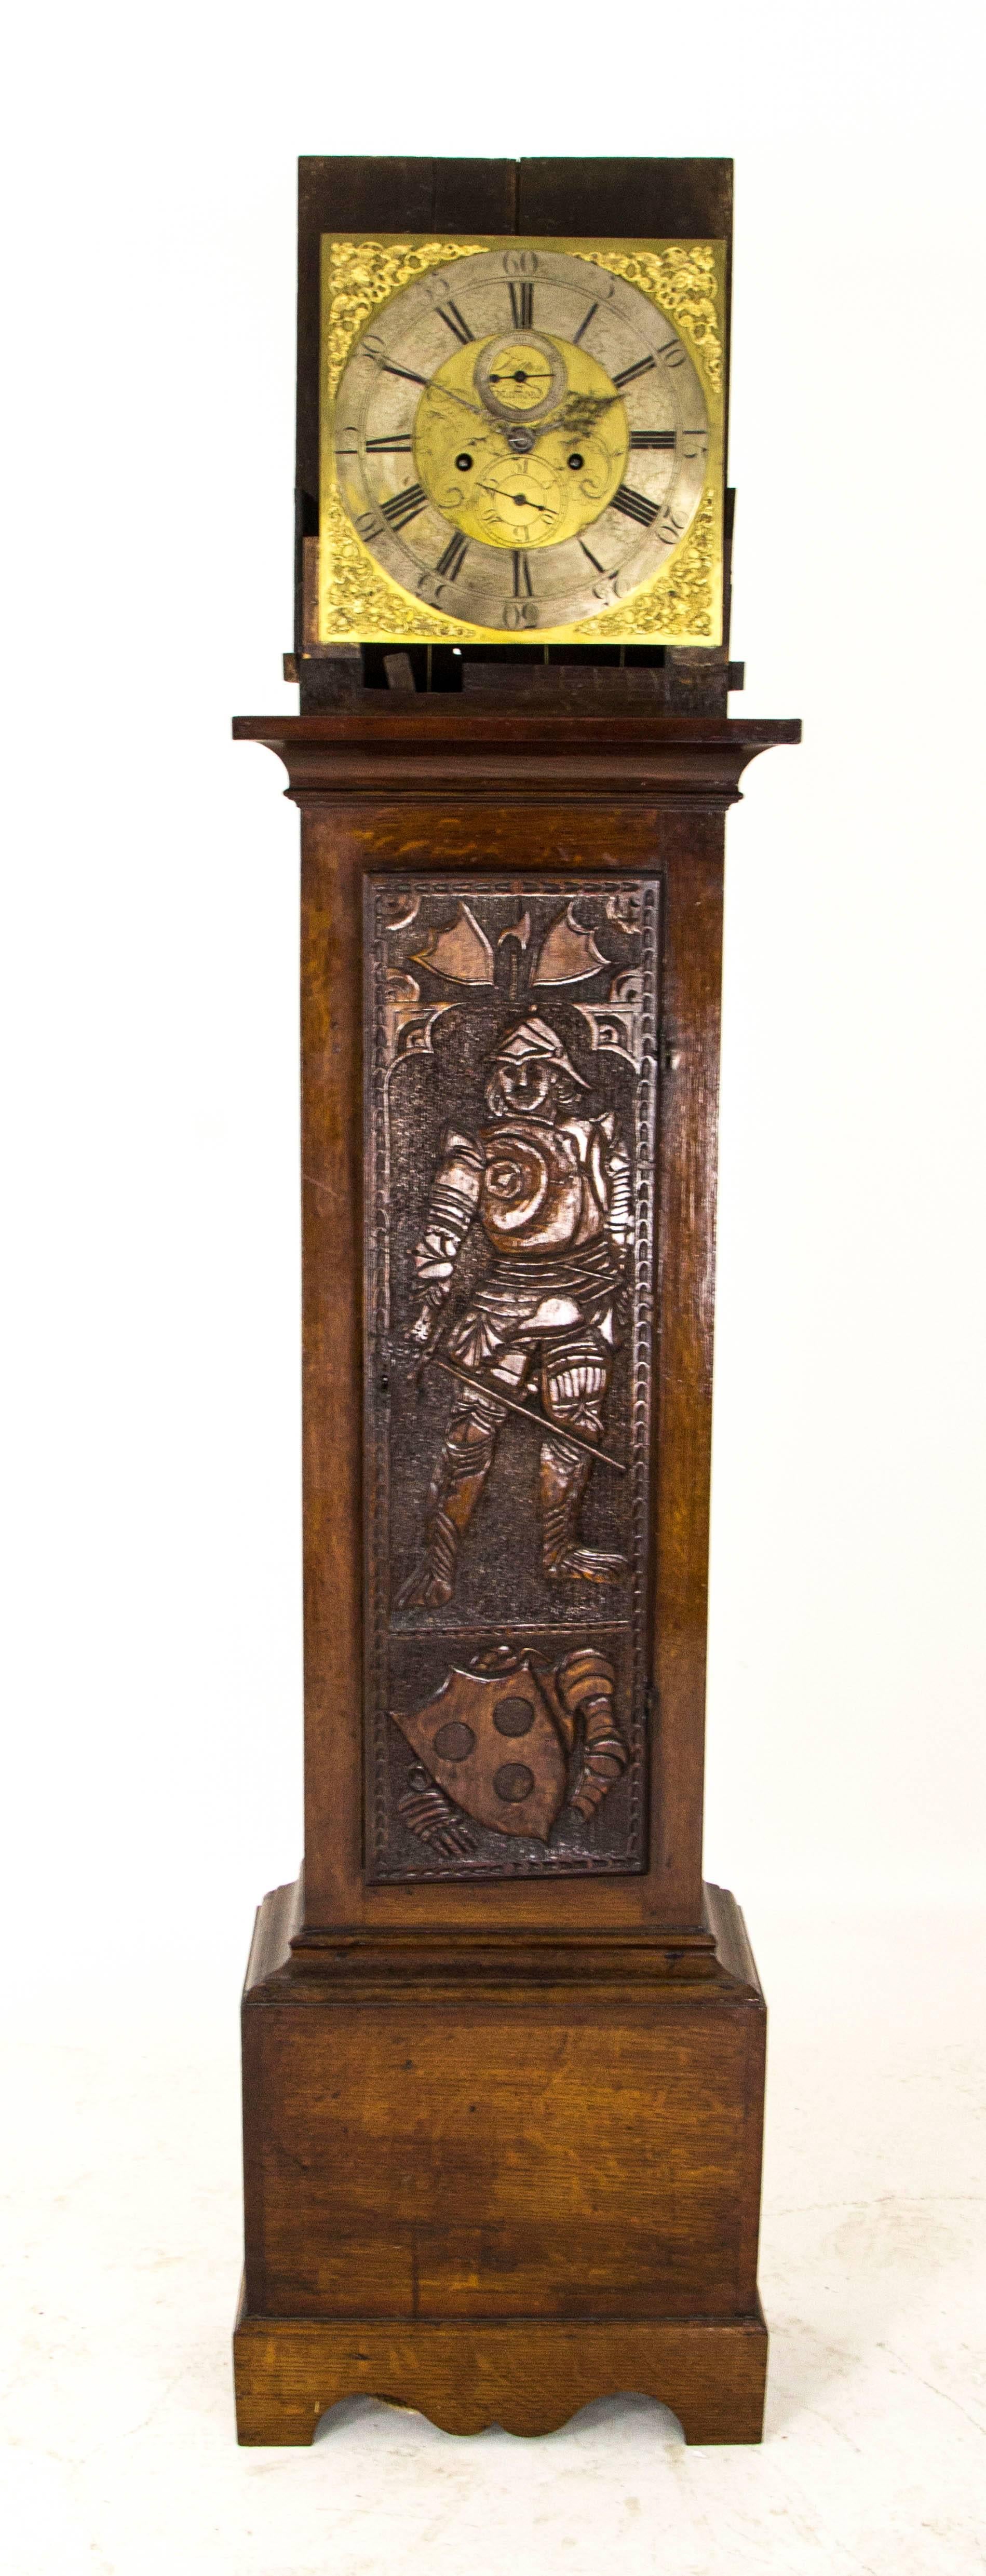 Grandfather clock long case clock brass faced, carved door Sutton of Stratford, B814

England, mid-18th century
Original solid oak case
Turned side pillars
Long front door with an image of a knight face.
Brass dial with corner spandrels
Steel